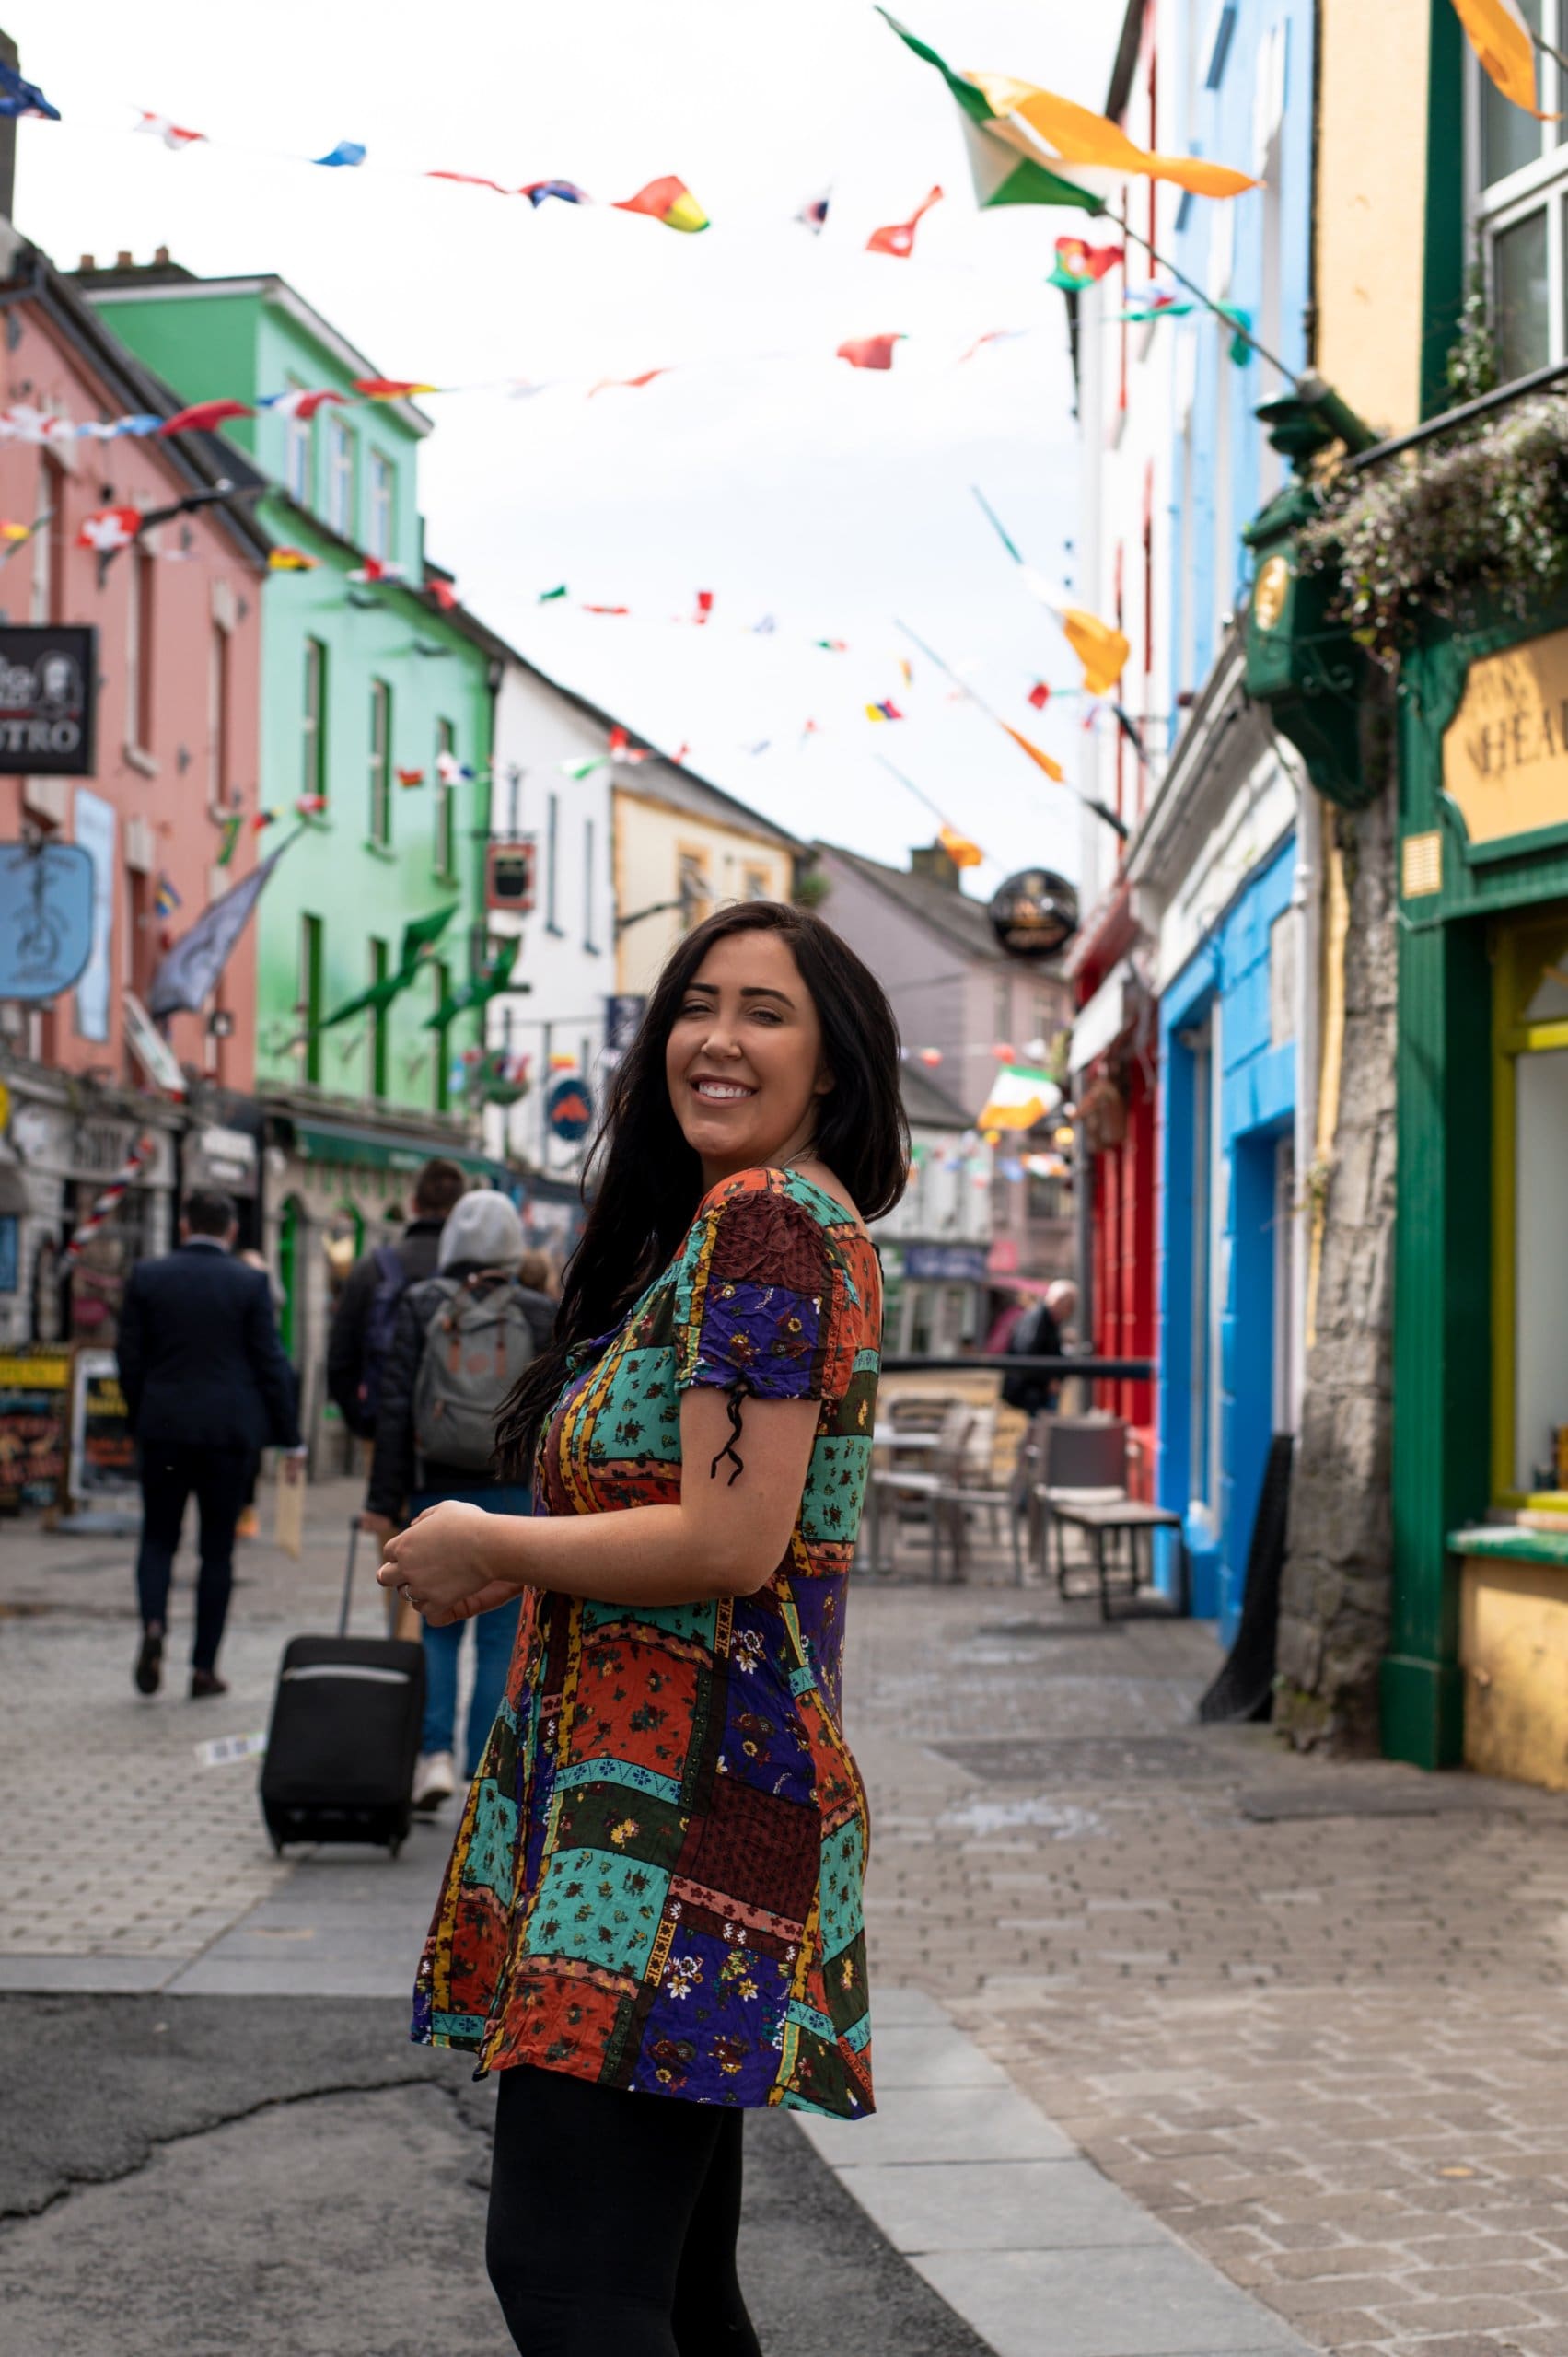 Galway, Ireland – A Complete Guide For Your Visit